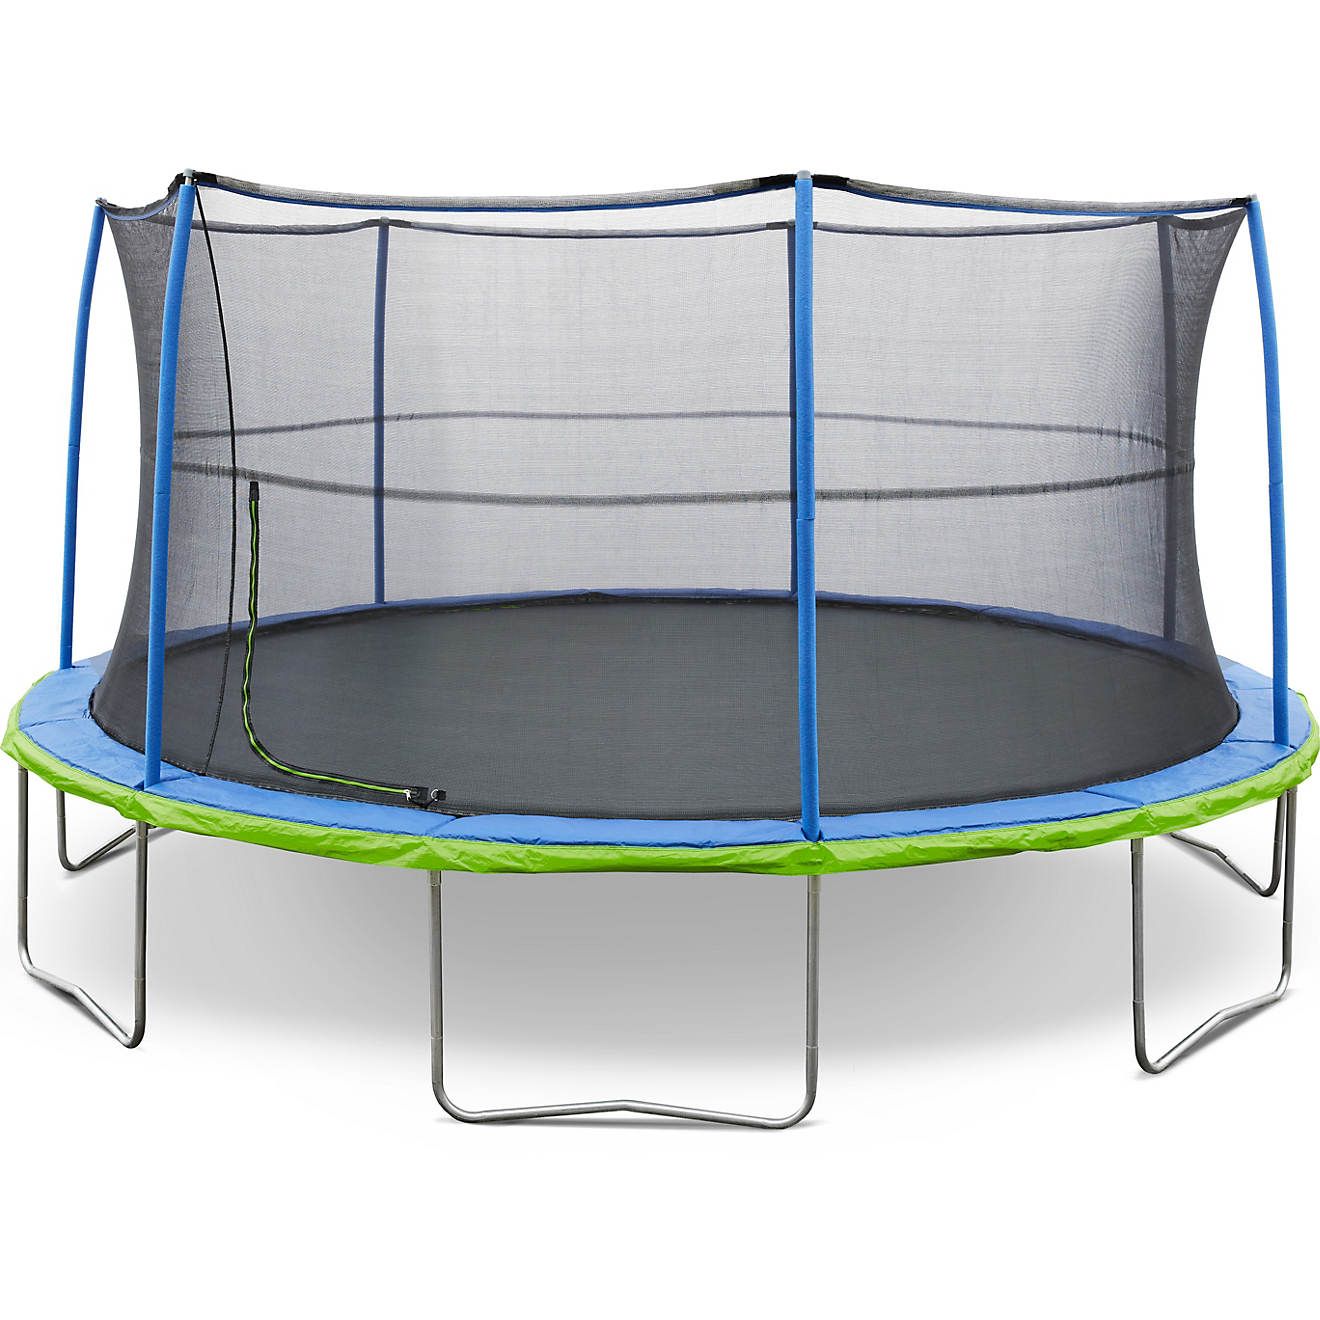 AGame 16 ft Round Trampoline | Academy | Academy Sports + Outdoors